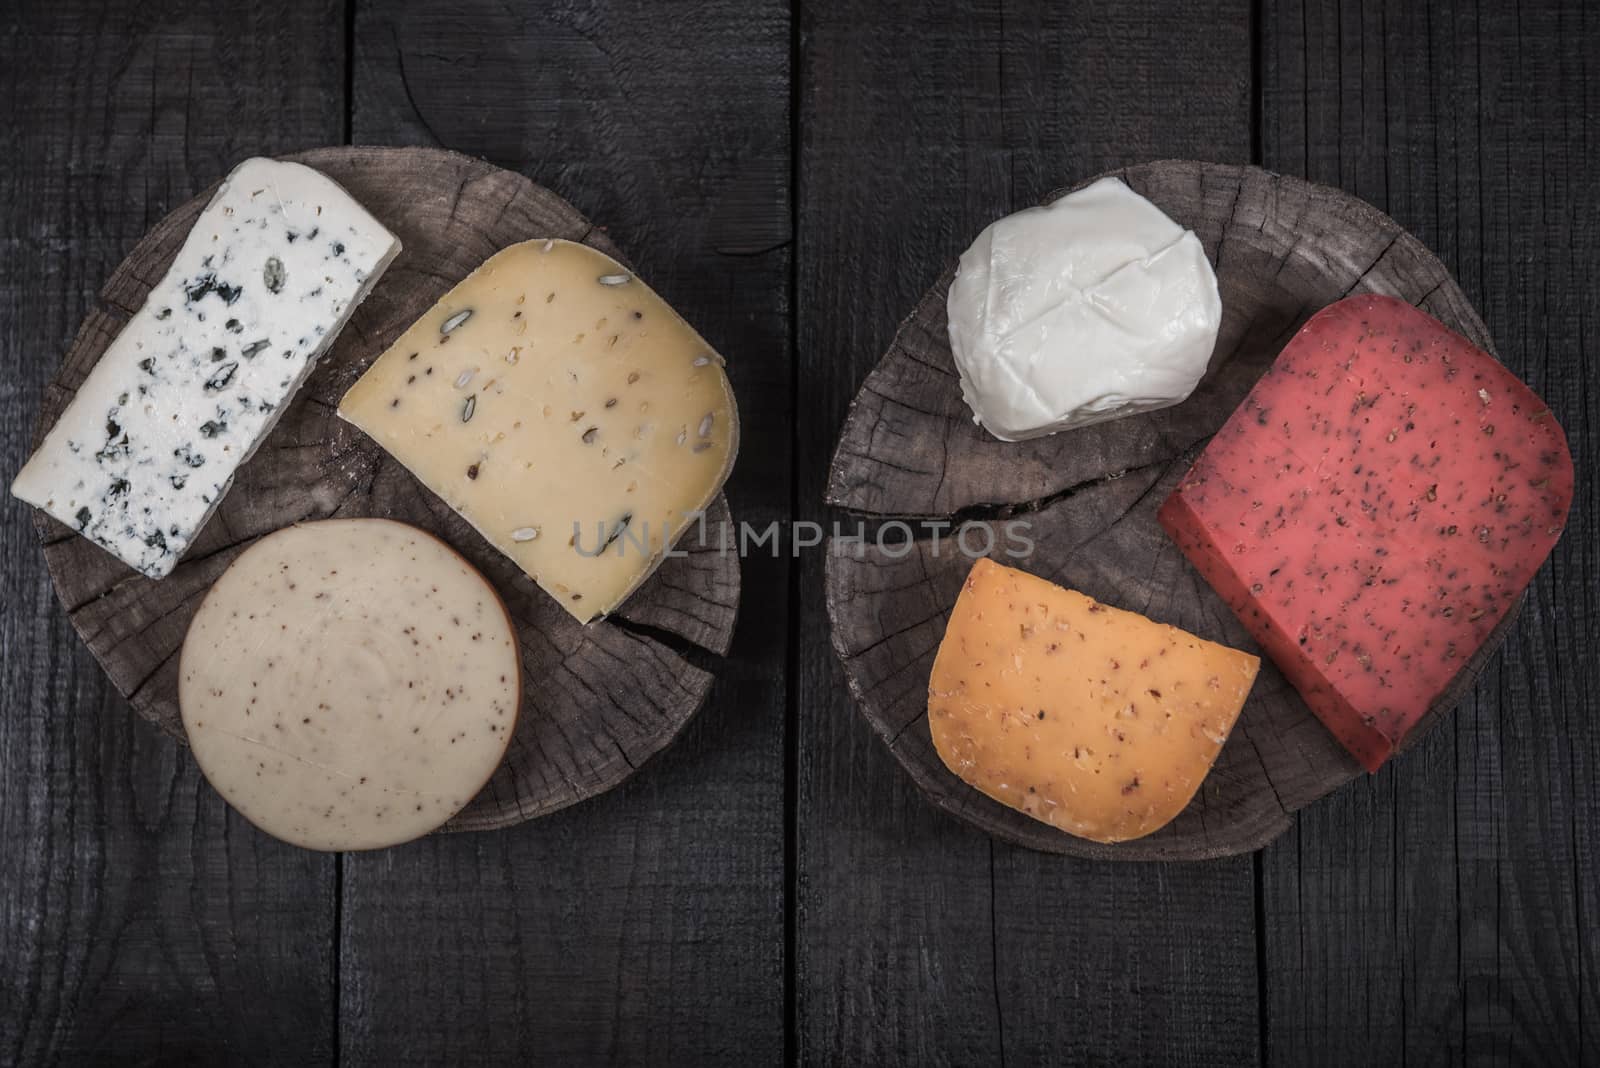 many kinds of cheeses by Andreua